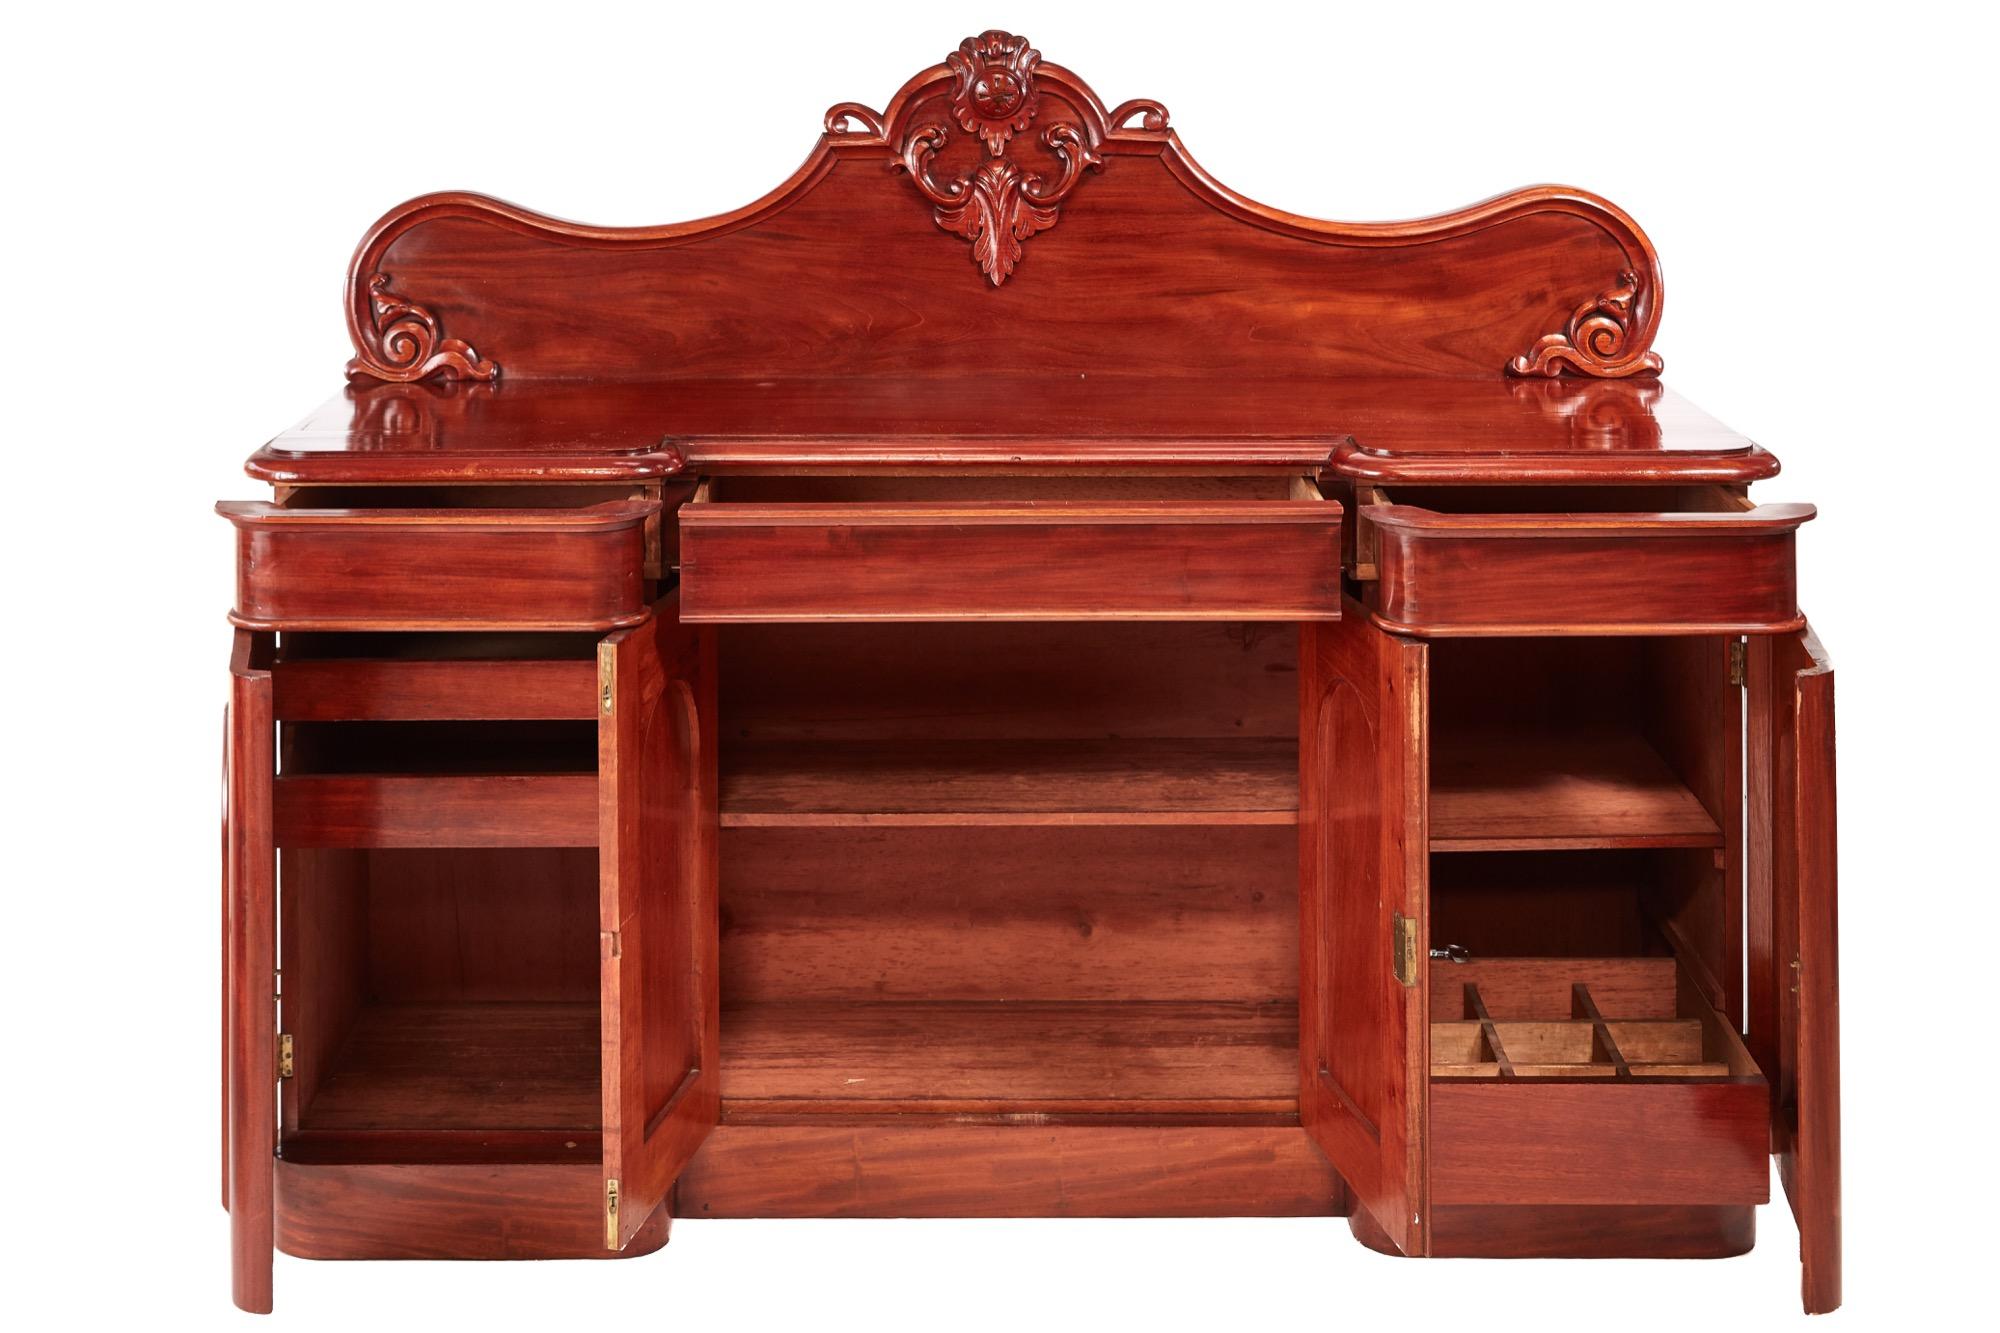 Quality Victorian carved mahogany sideboard, with a lovely shaped carved back, lovely quality mahogany top, three frieze drawers, four quality figured mahogany panelled doors, lovely fitted interior with drawers and sliding trays, standing on a